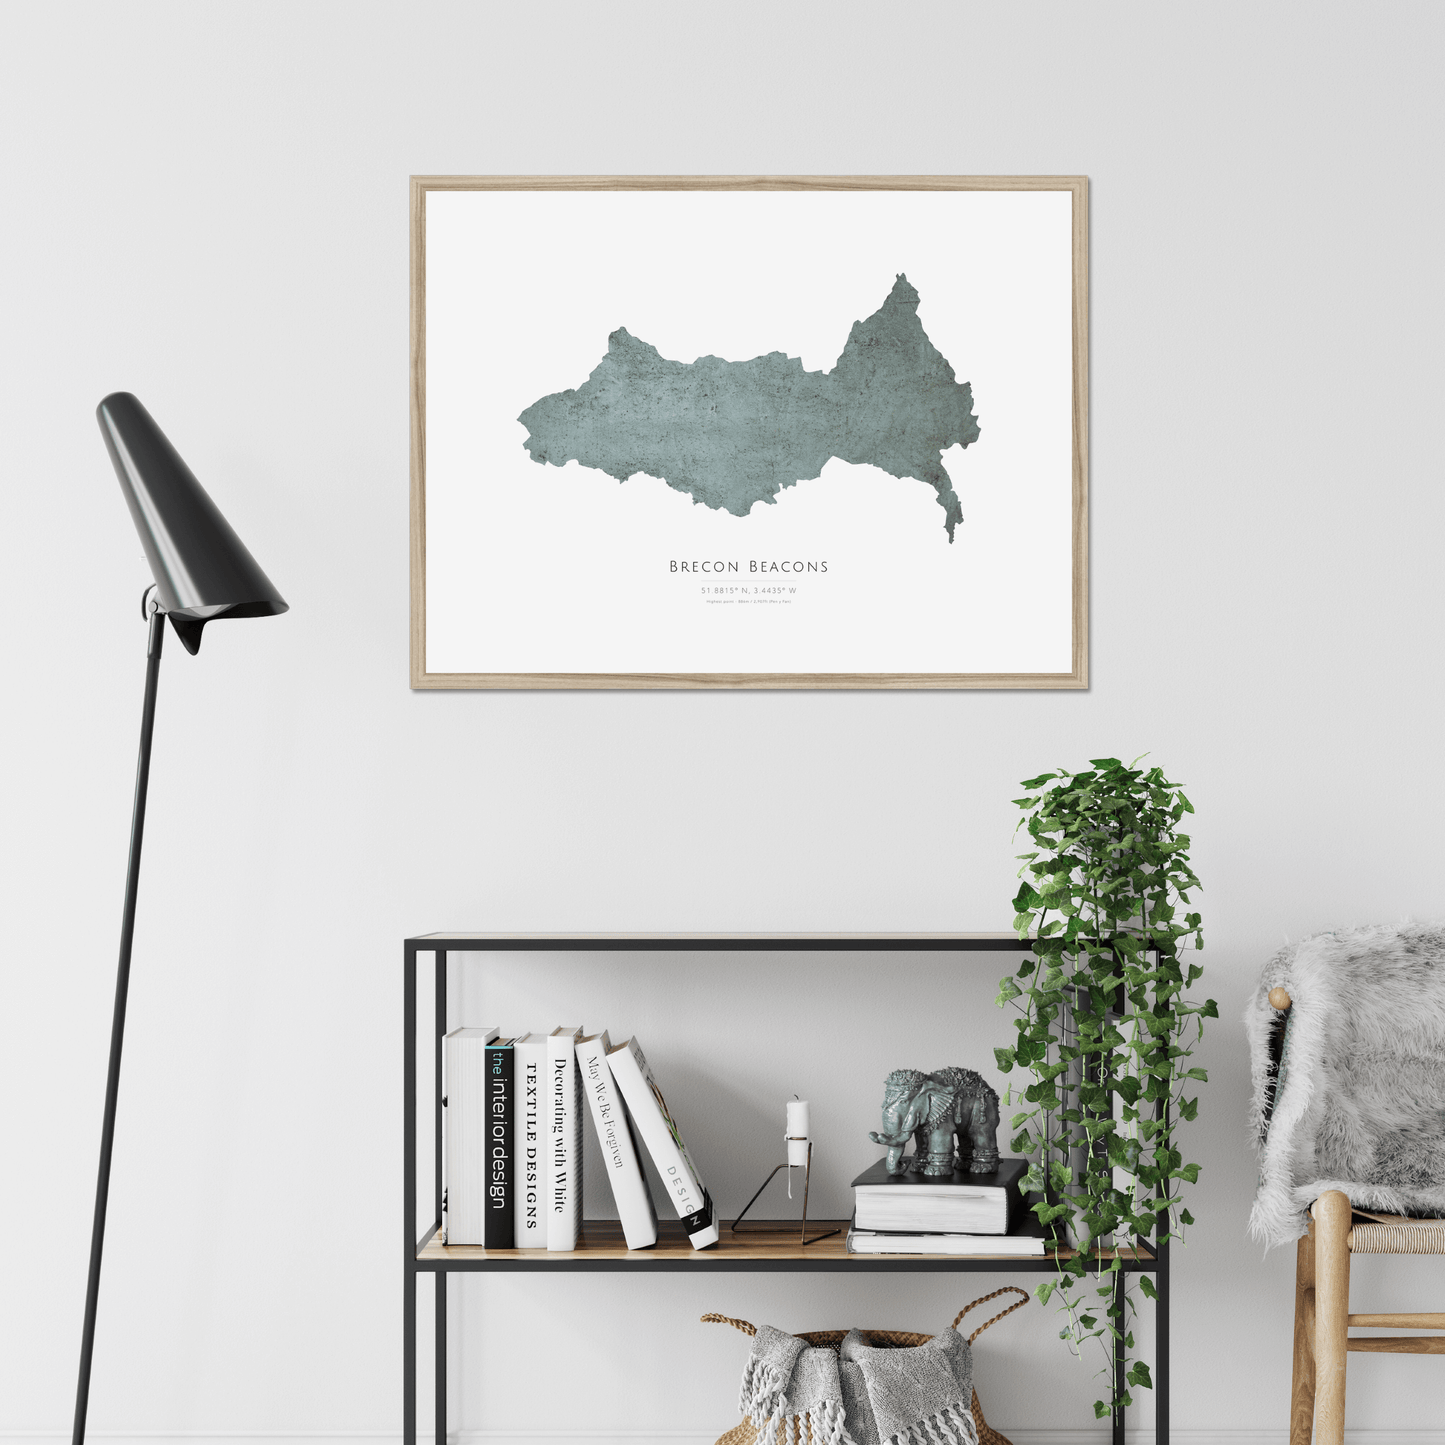 Brecon Beacons -  Framed & Mounted Map